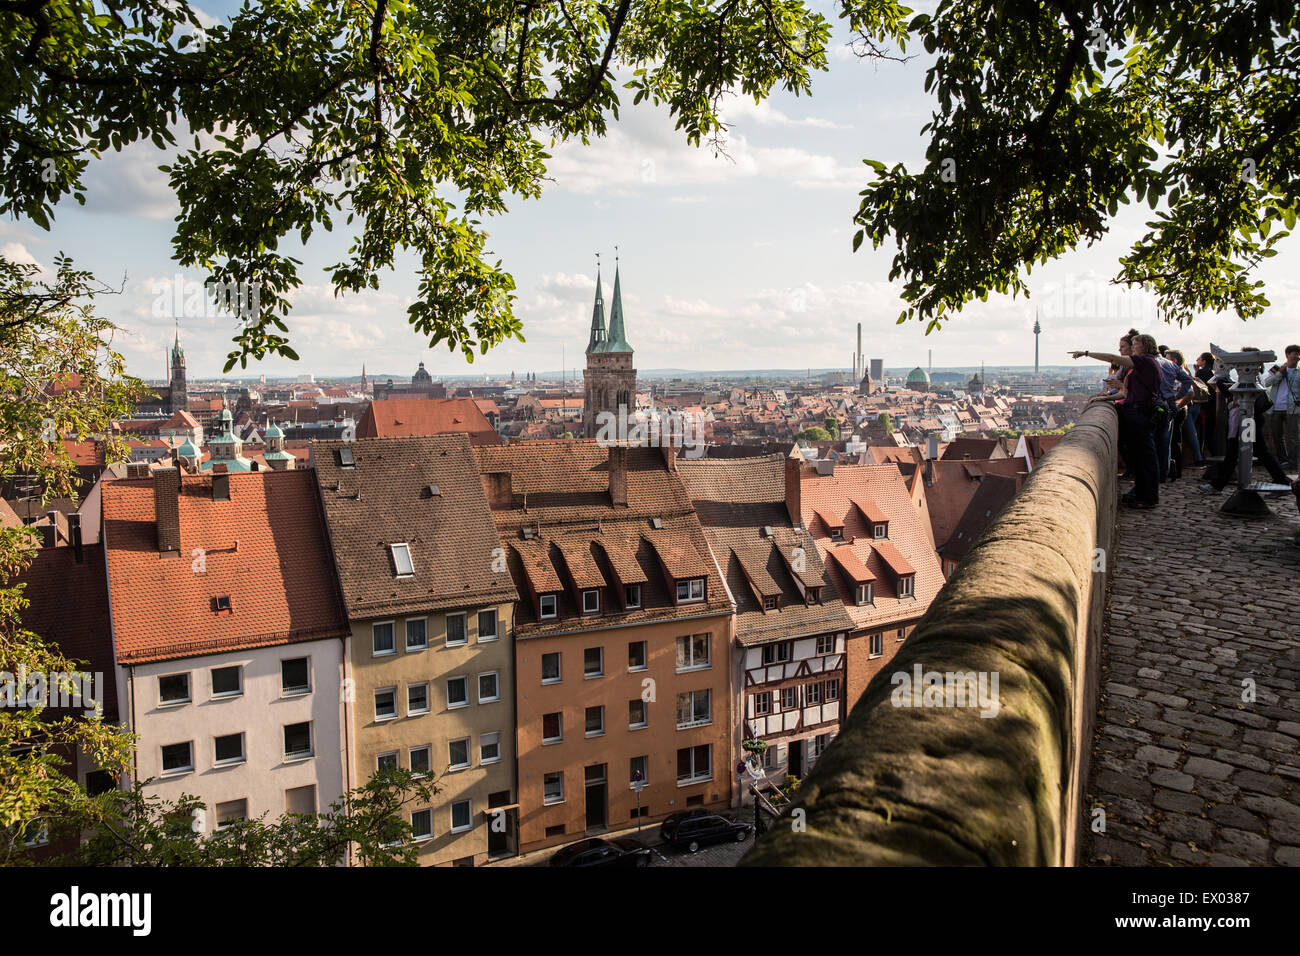 Group of tourists viewing the old town, Nuremberg, Germany Stock Photo